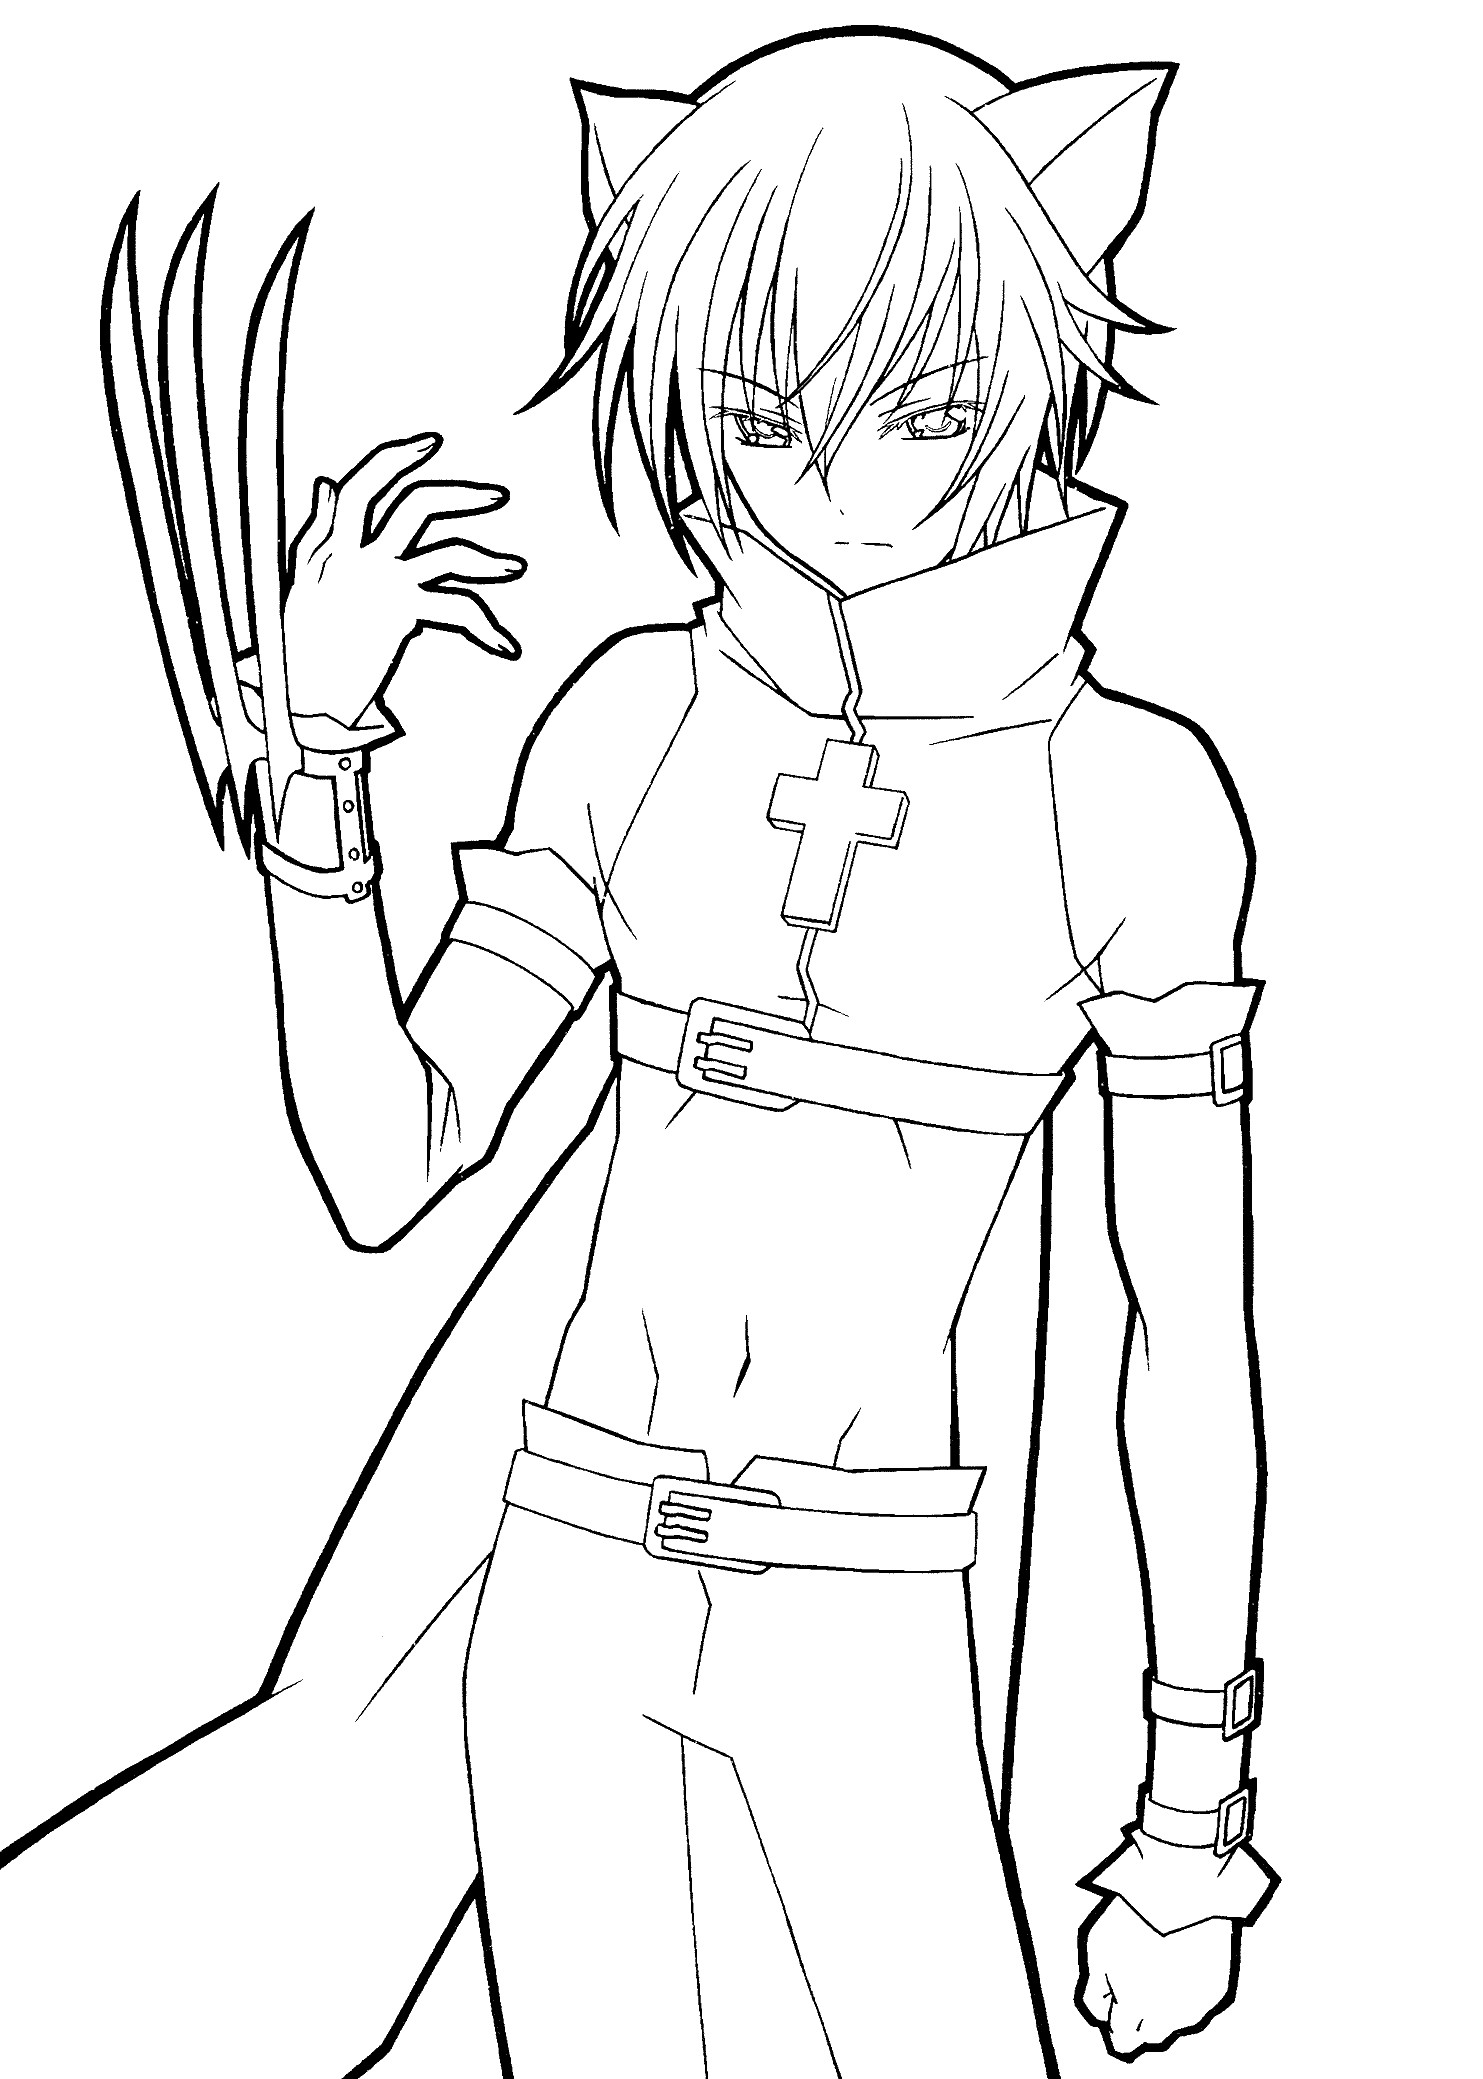 Anime Boys Coloring Pages - Coloring Home